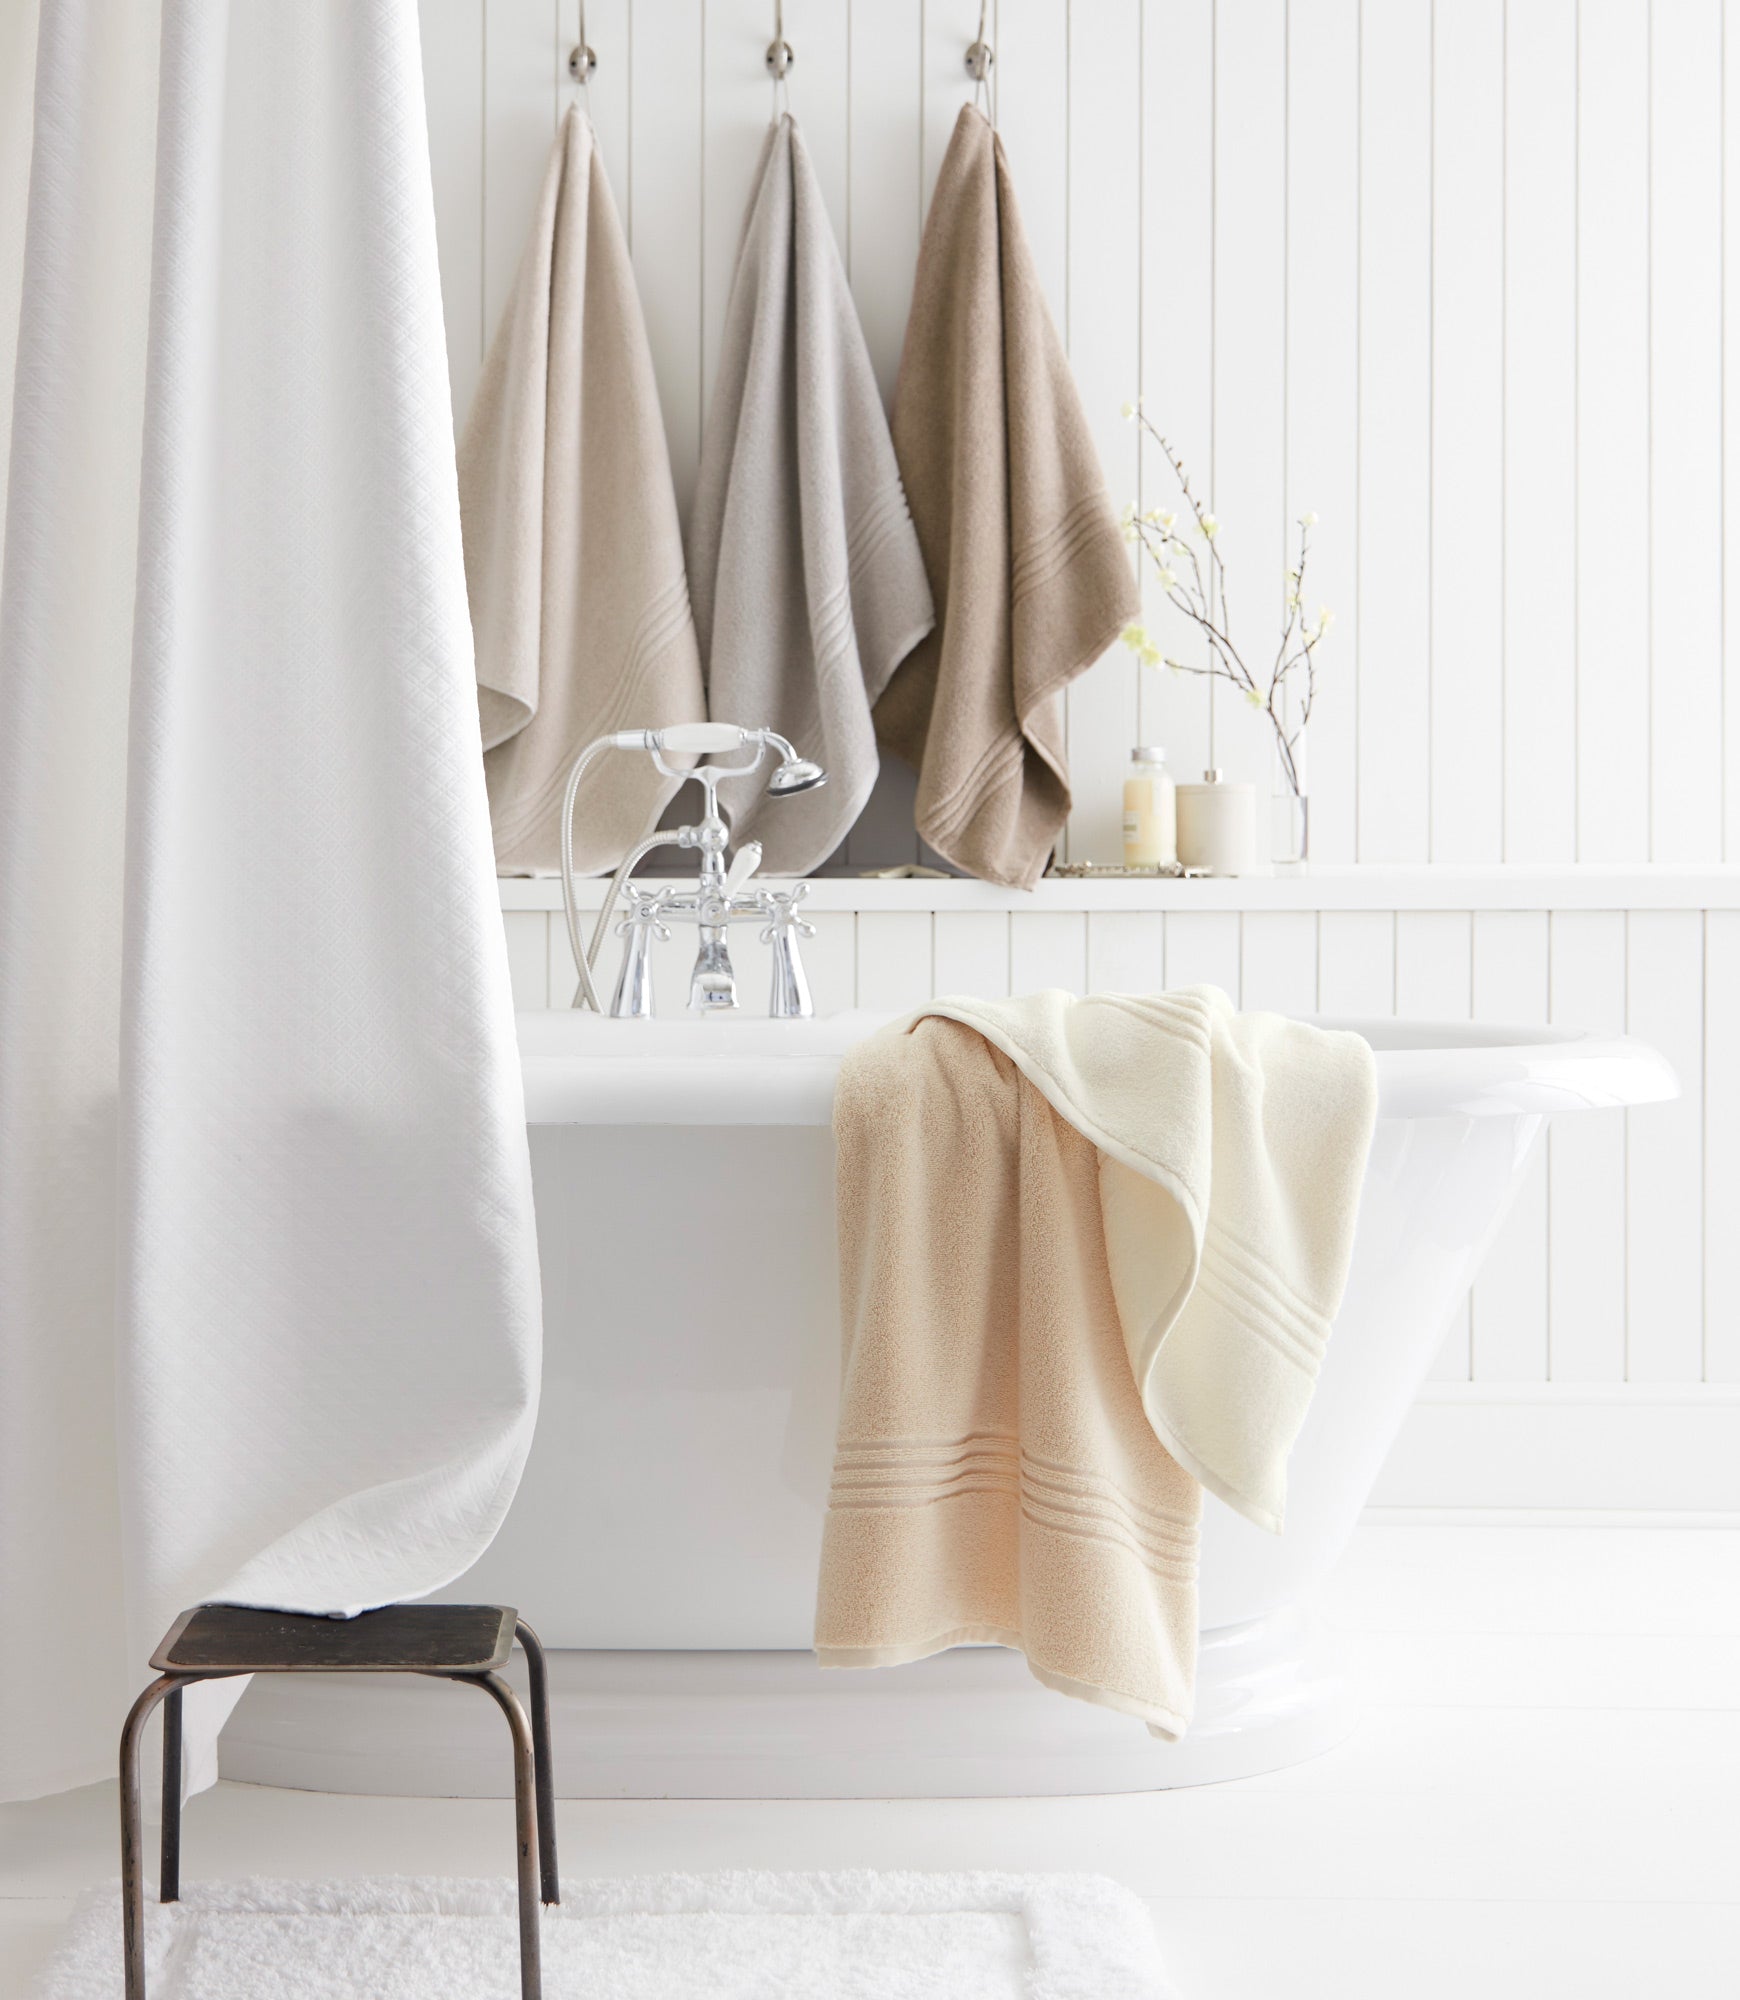 Hotel Hand Towels. In the bath linen section, hand towels…, by Ally Zheng